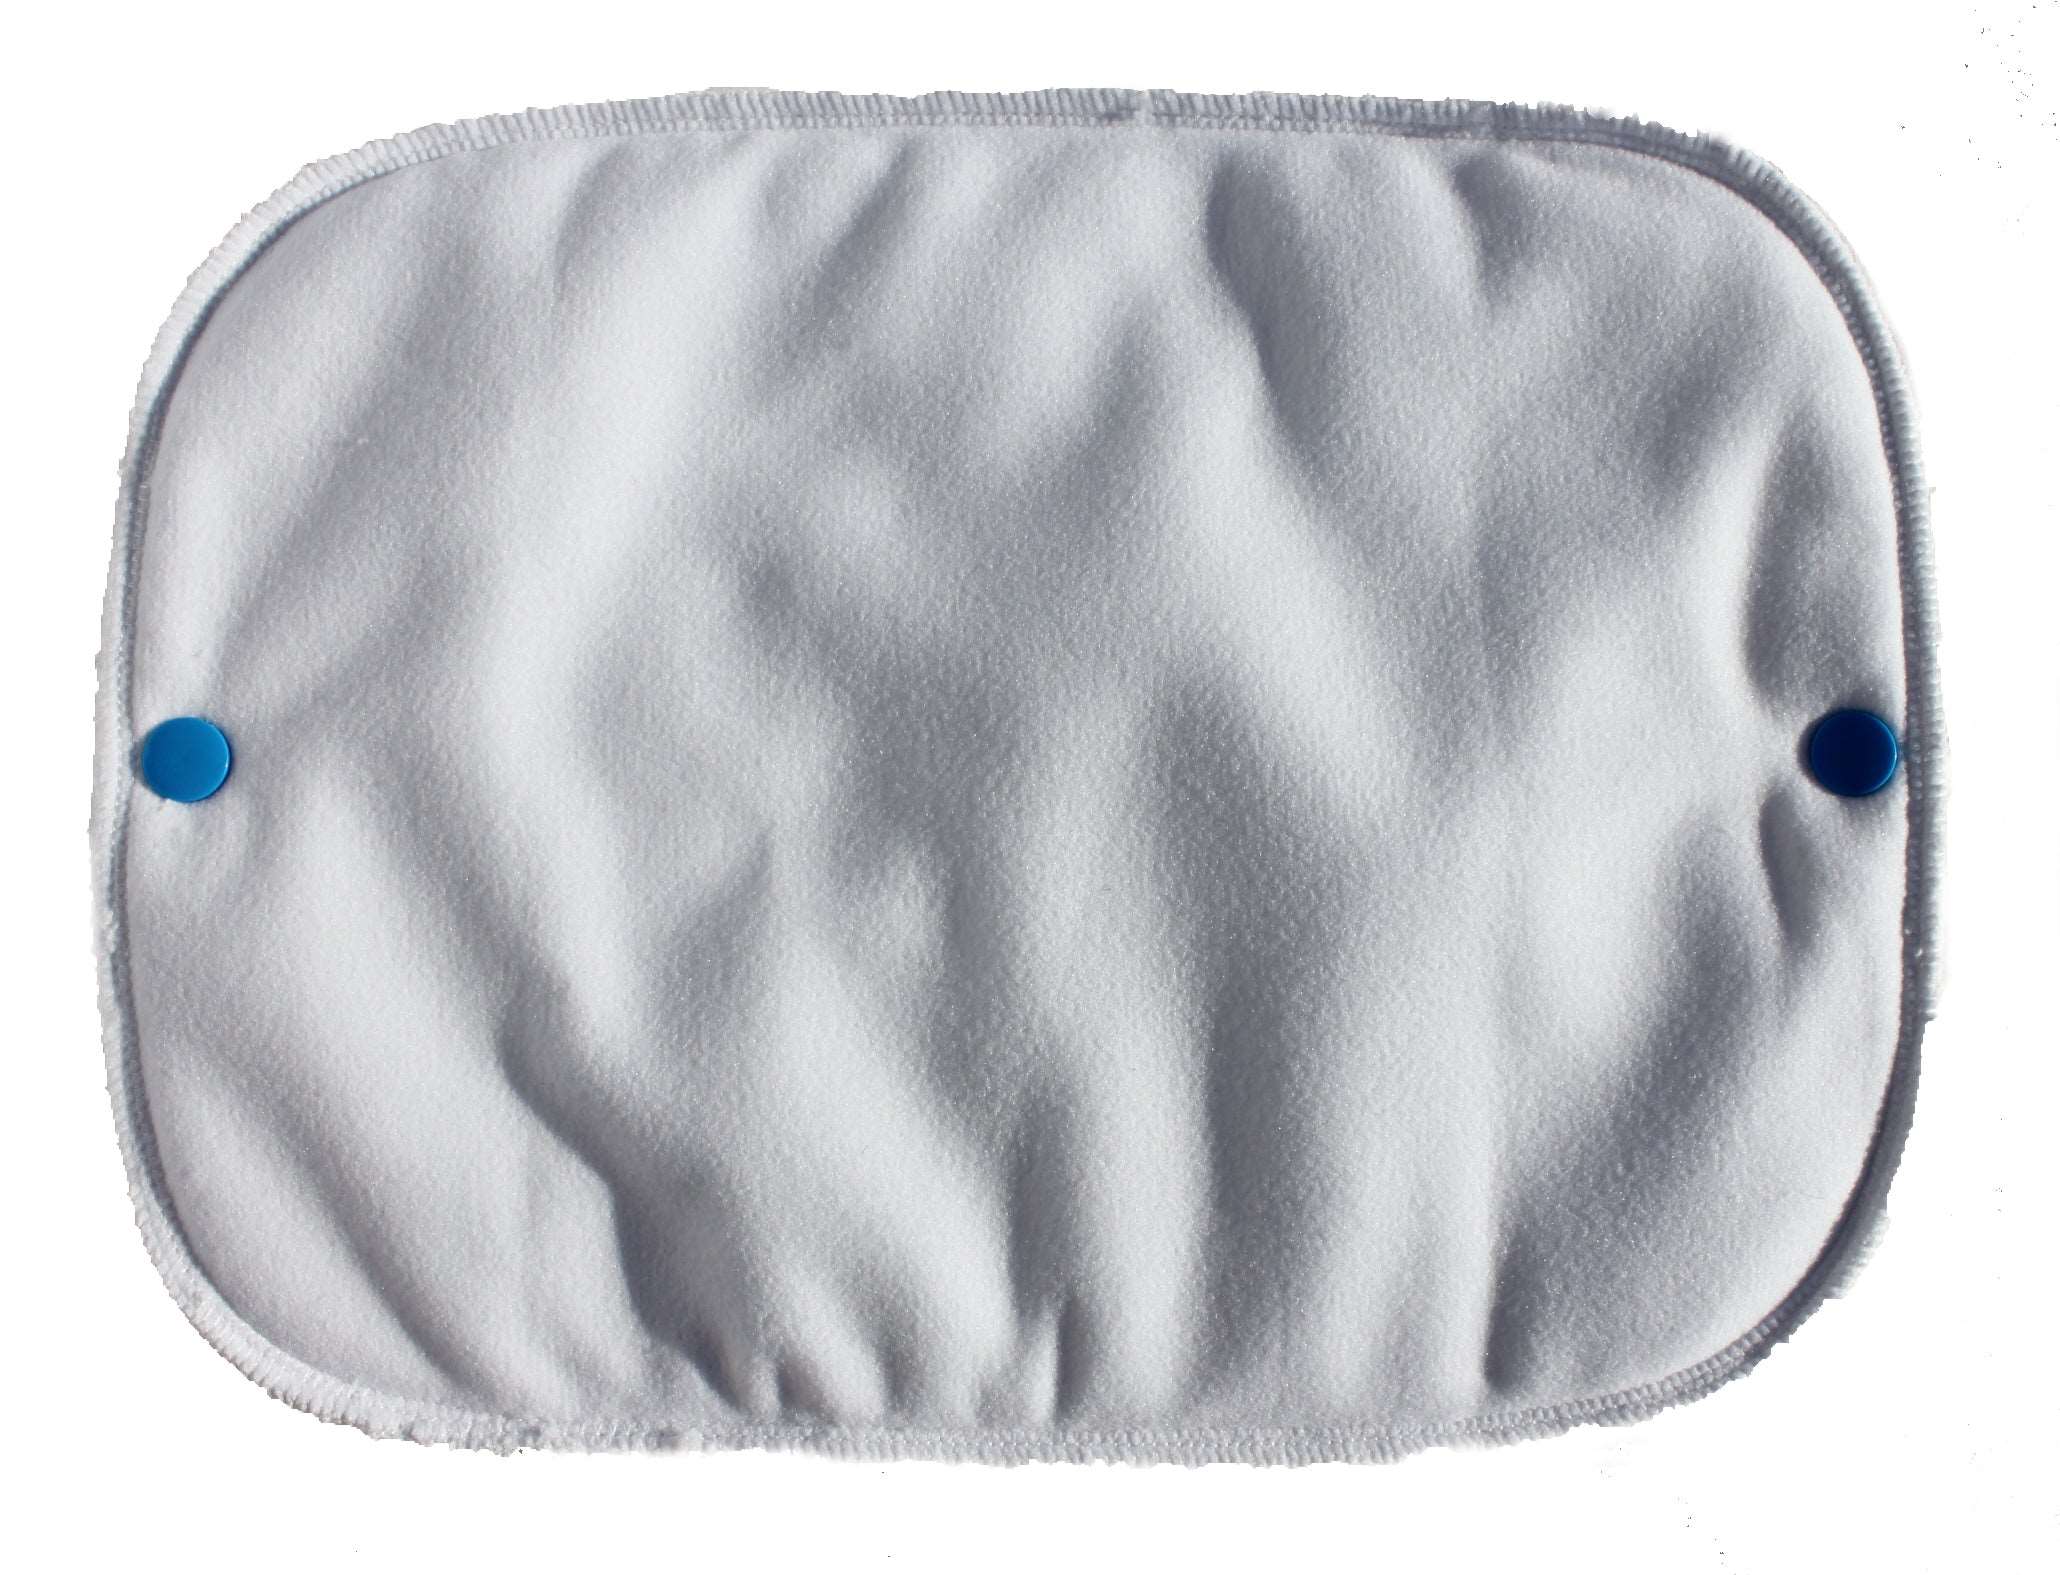 Washable Popper Pads